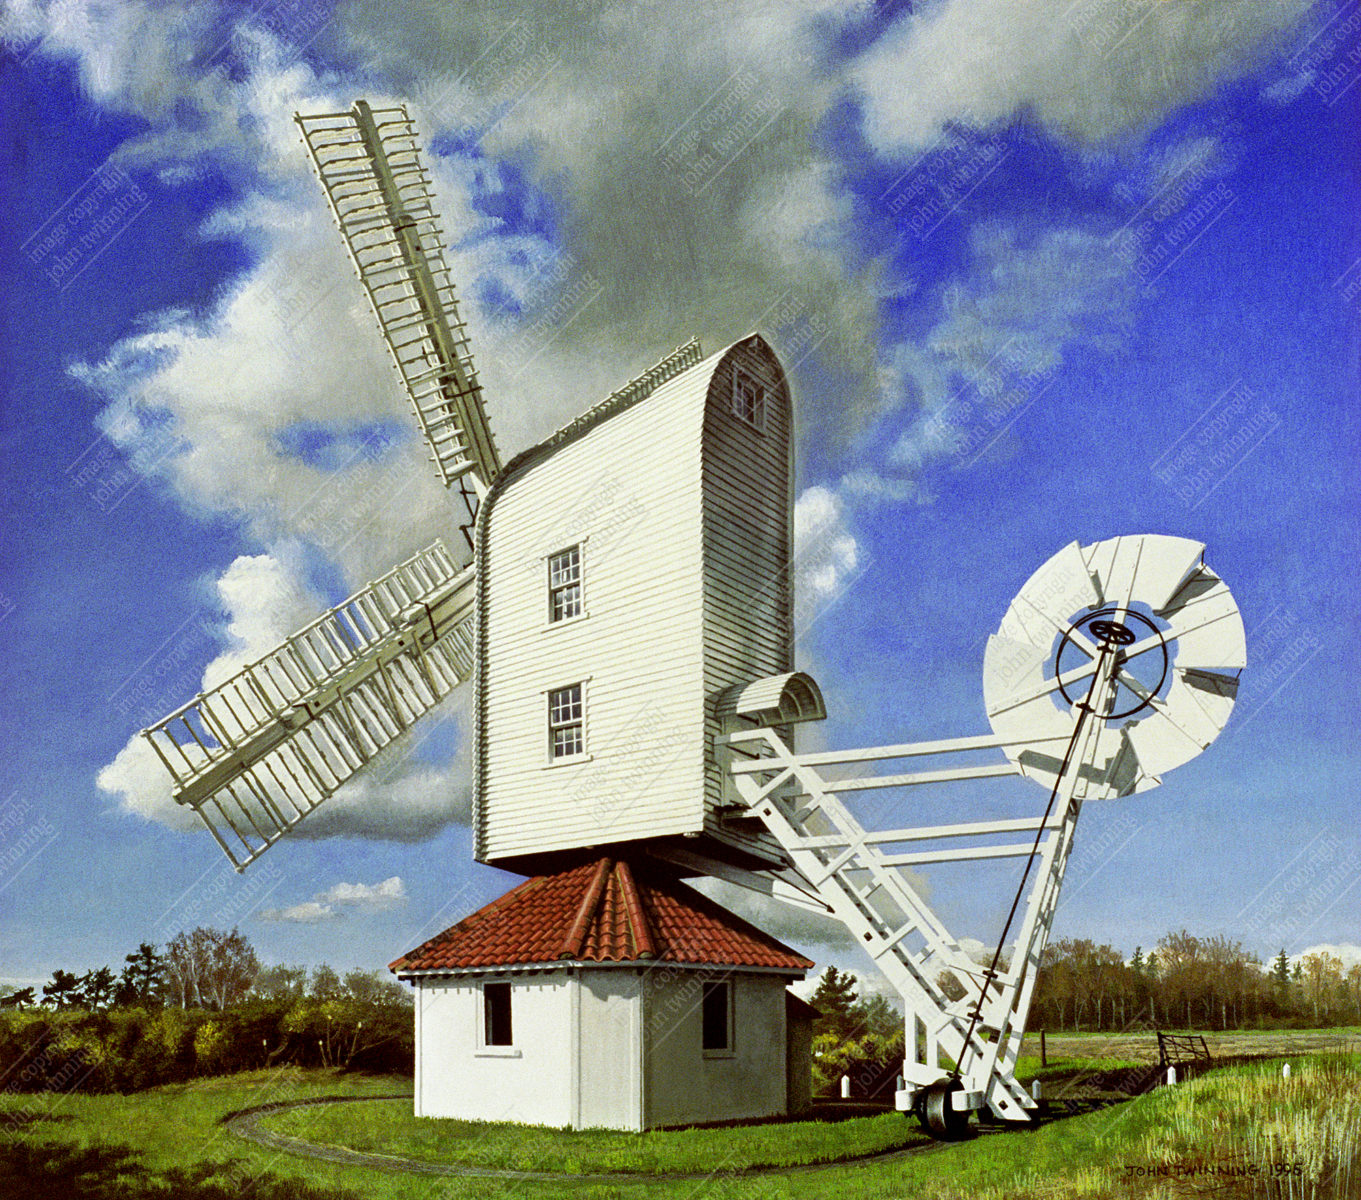 'Windmill At Thorpeness, Suffolk' - art print from a painting of a beautiful windmill in a country setting